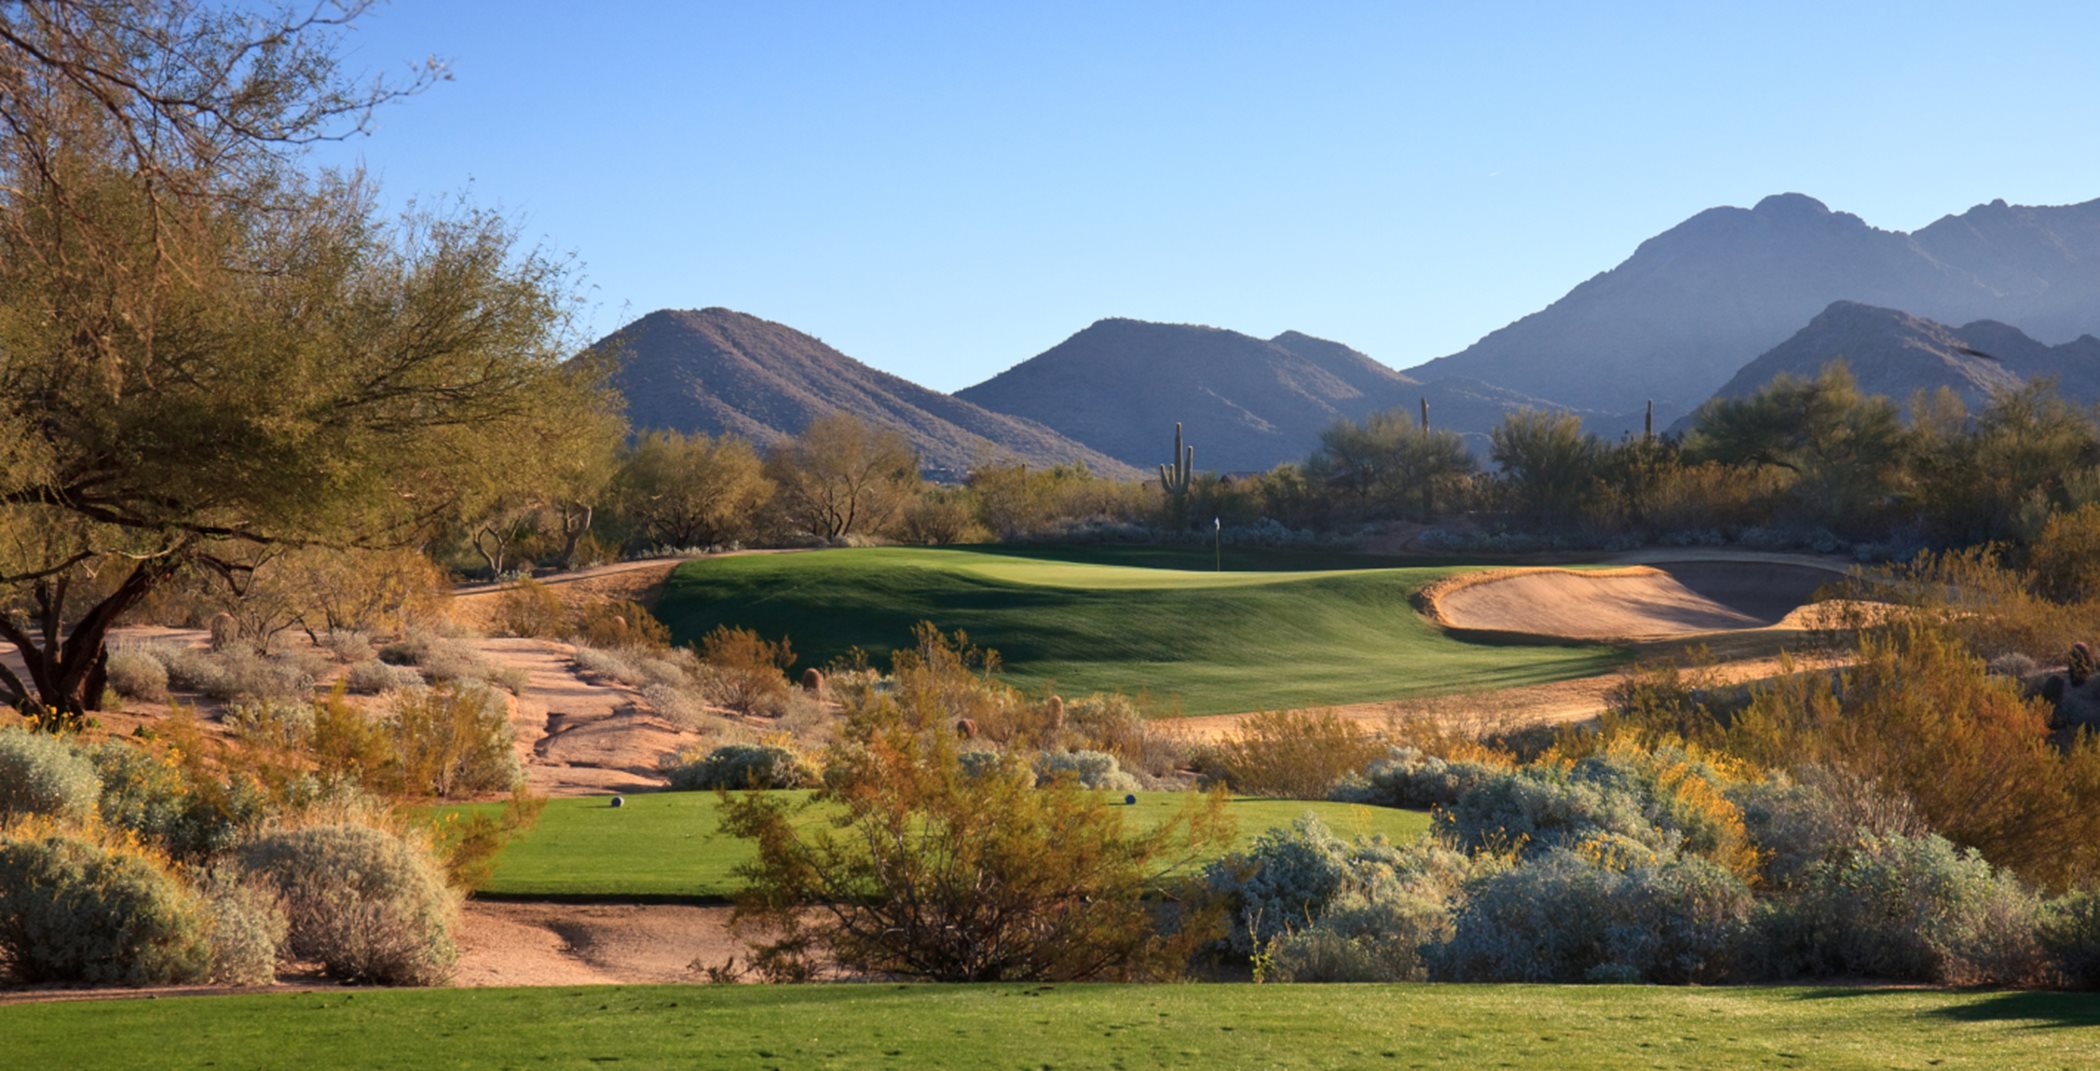 Golf course in a desert landscape with mountains in the background